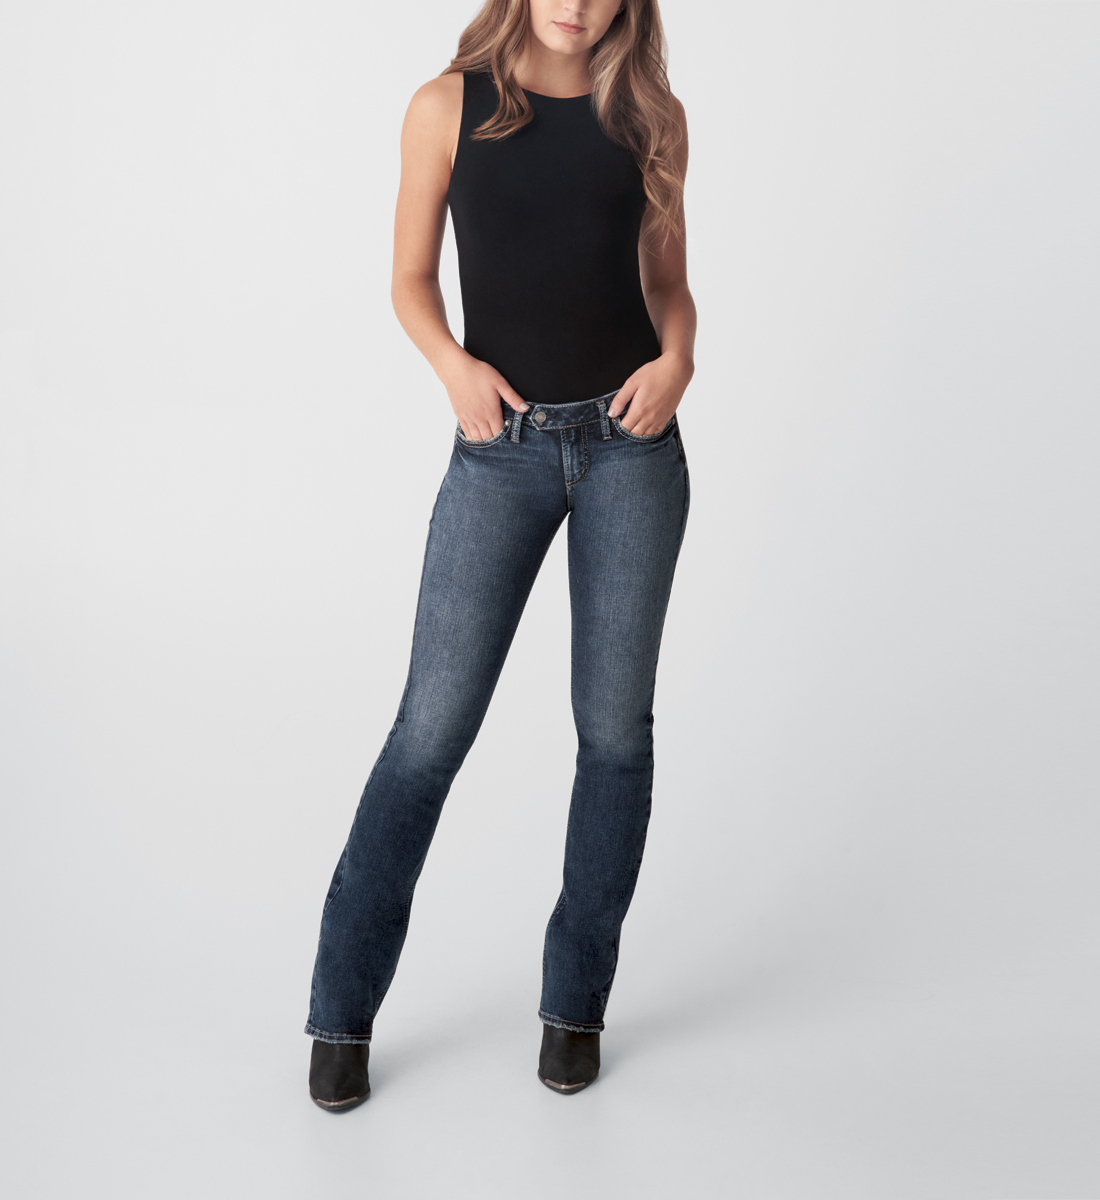 Silver Jeans Tuesday Low Rise Slim Bootcut Jeans